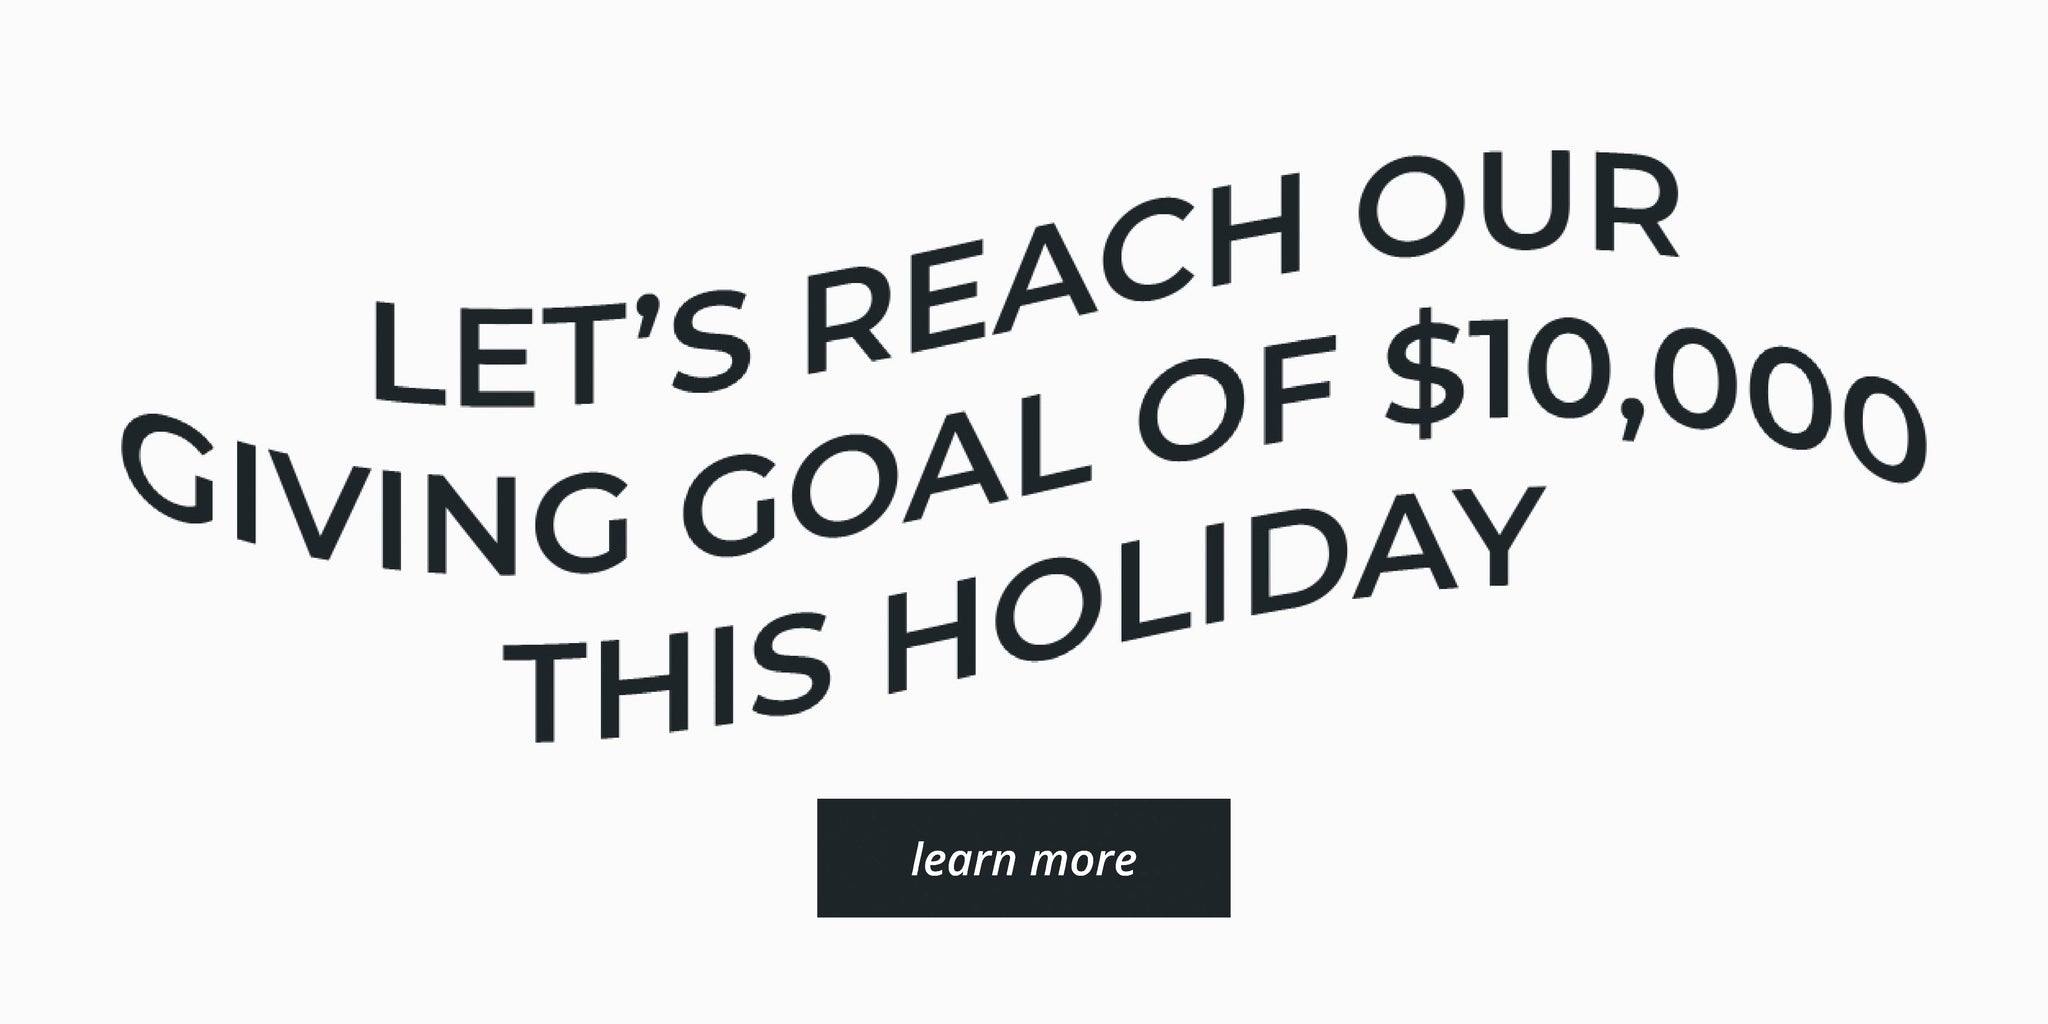 Scoria World Gift Guide 2021 - Holiday Giving Goal